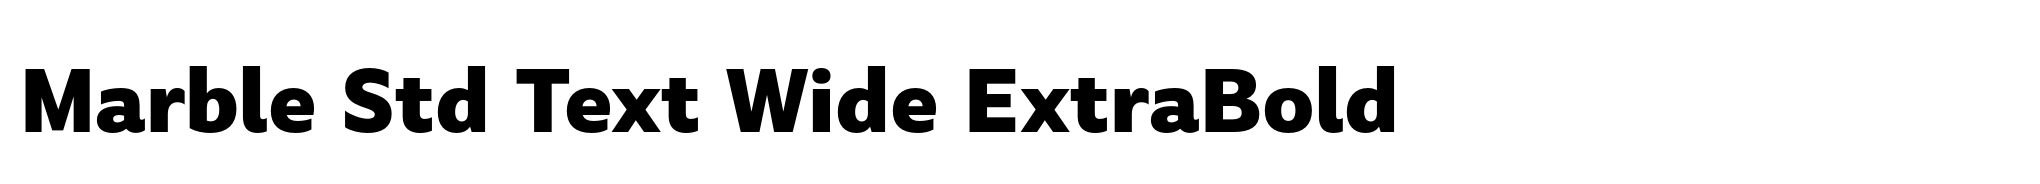 Marble Std Text Wide ExtraBold image